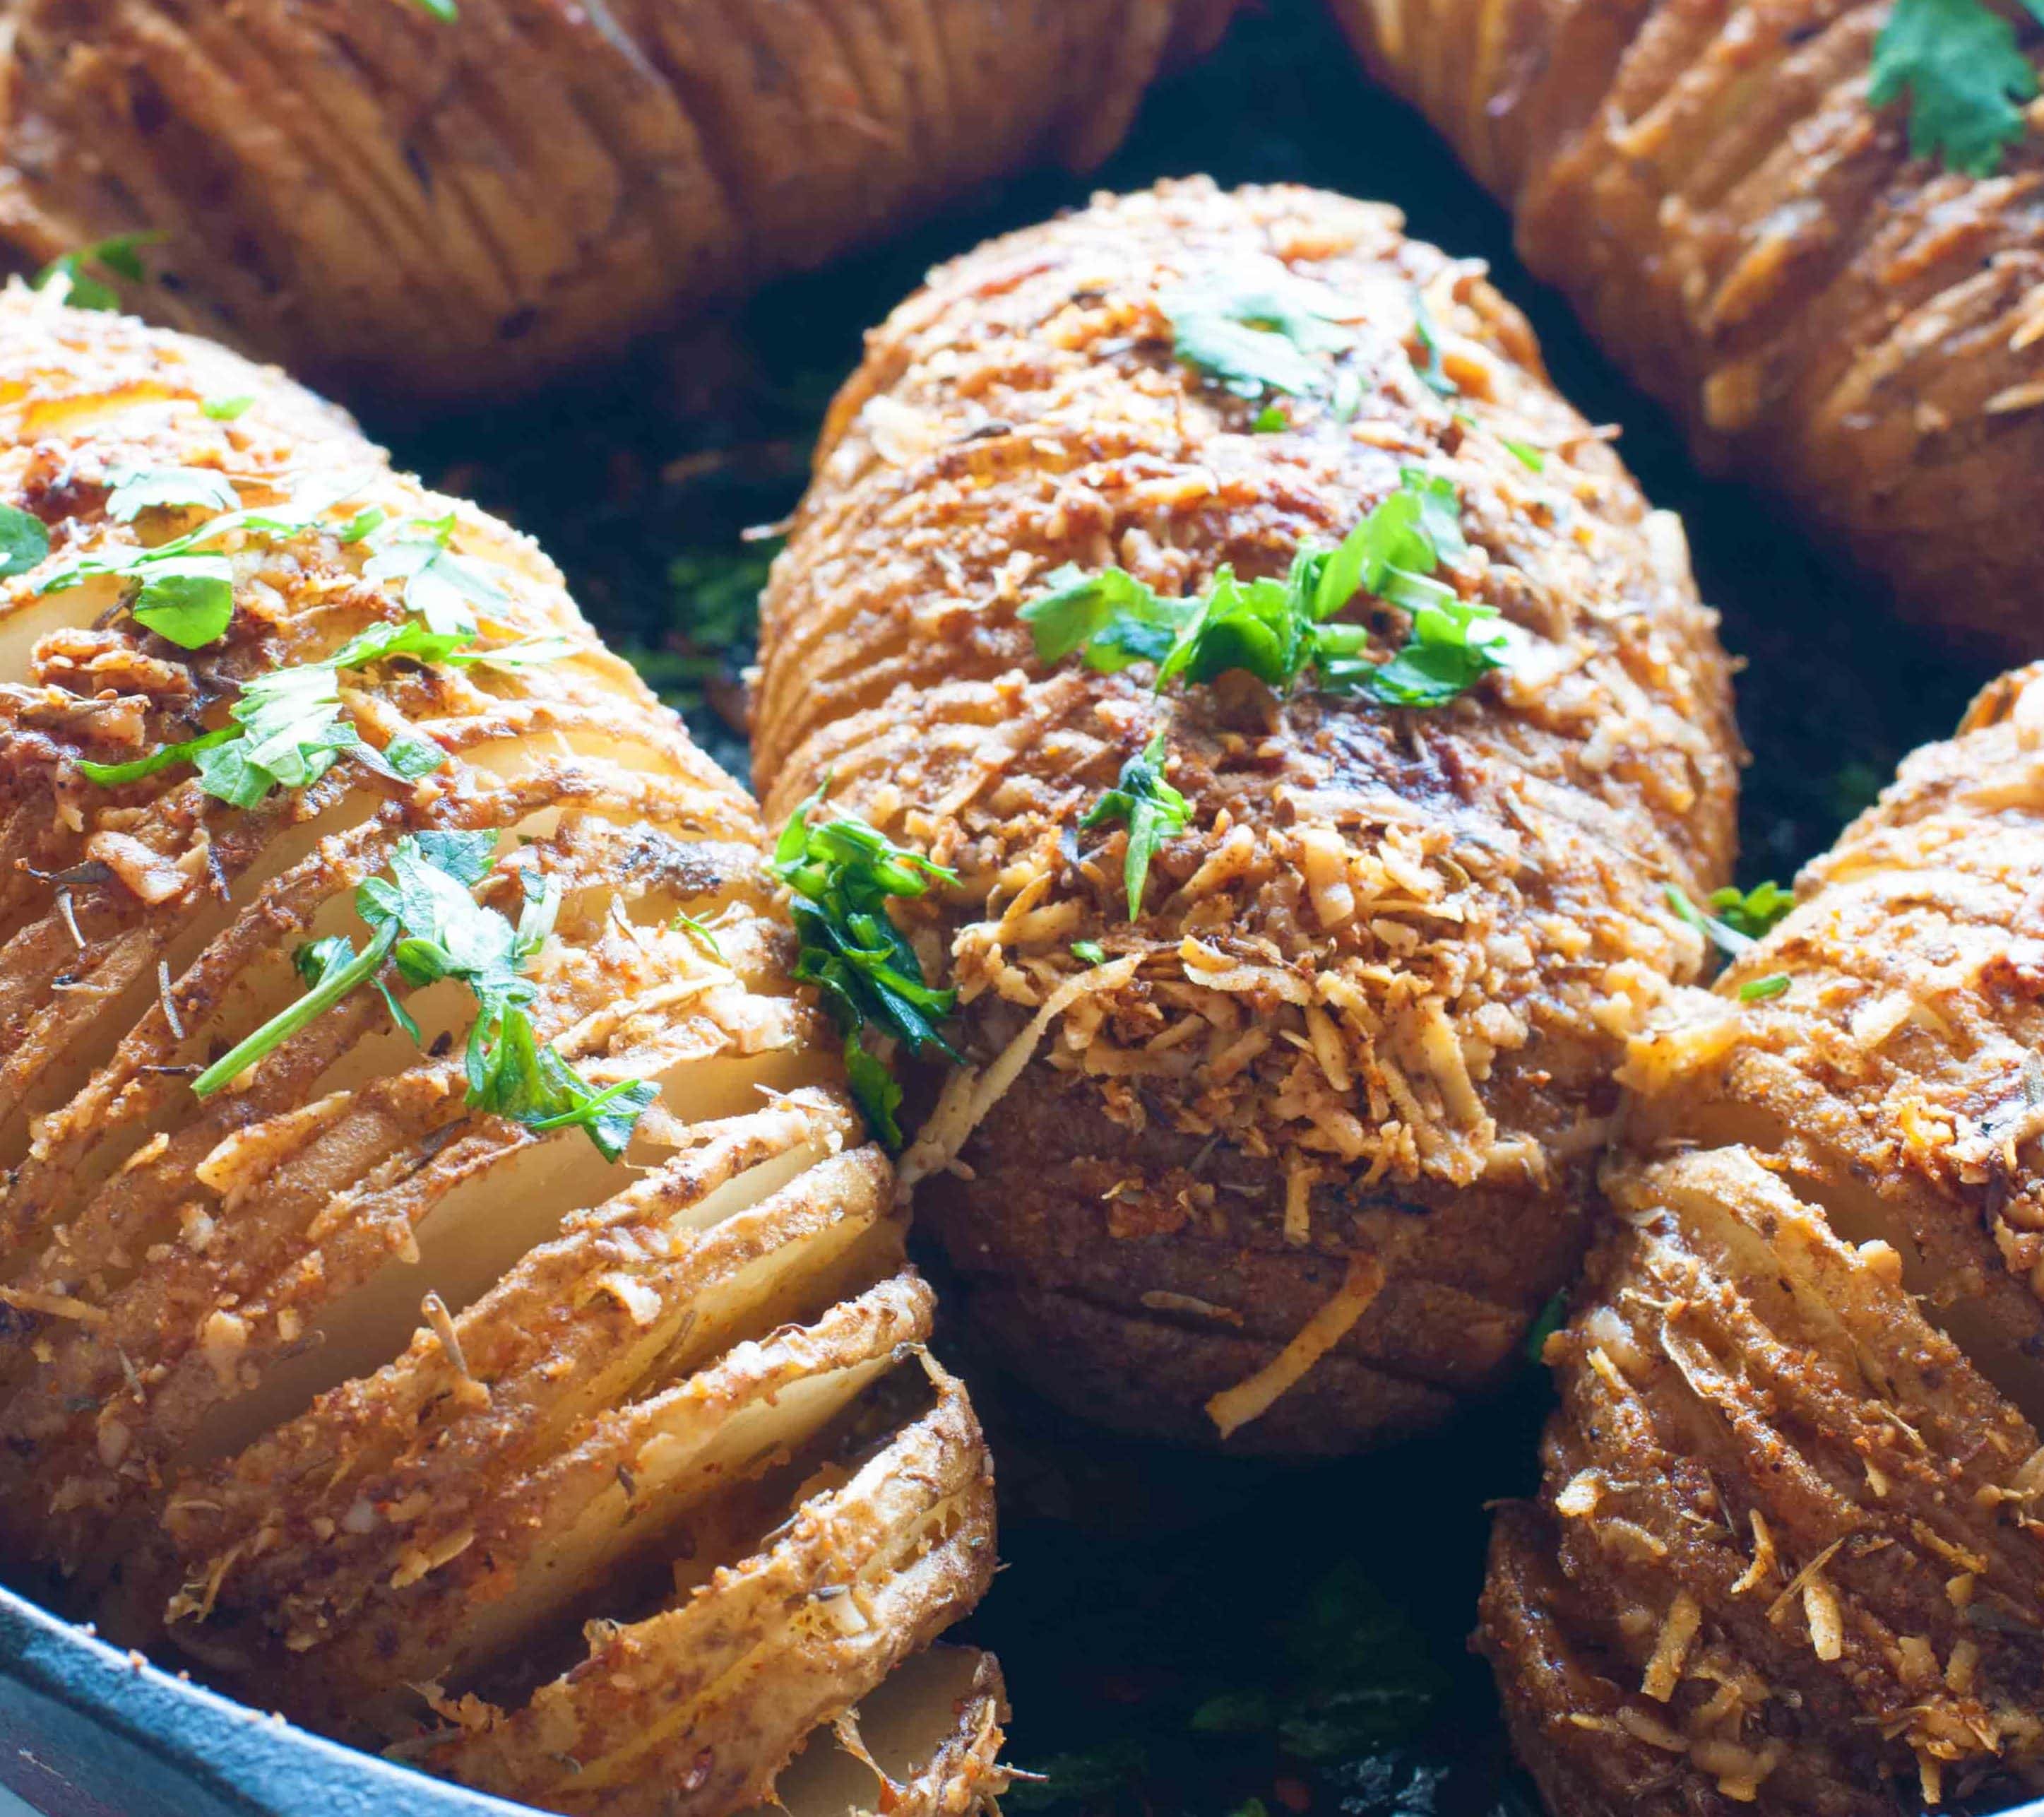 Baked Parmesan Crusted Hasselback Potatoes